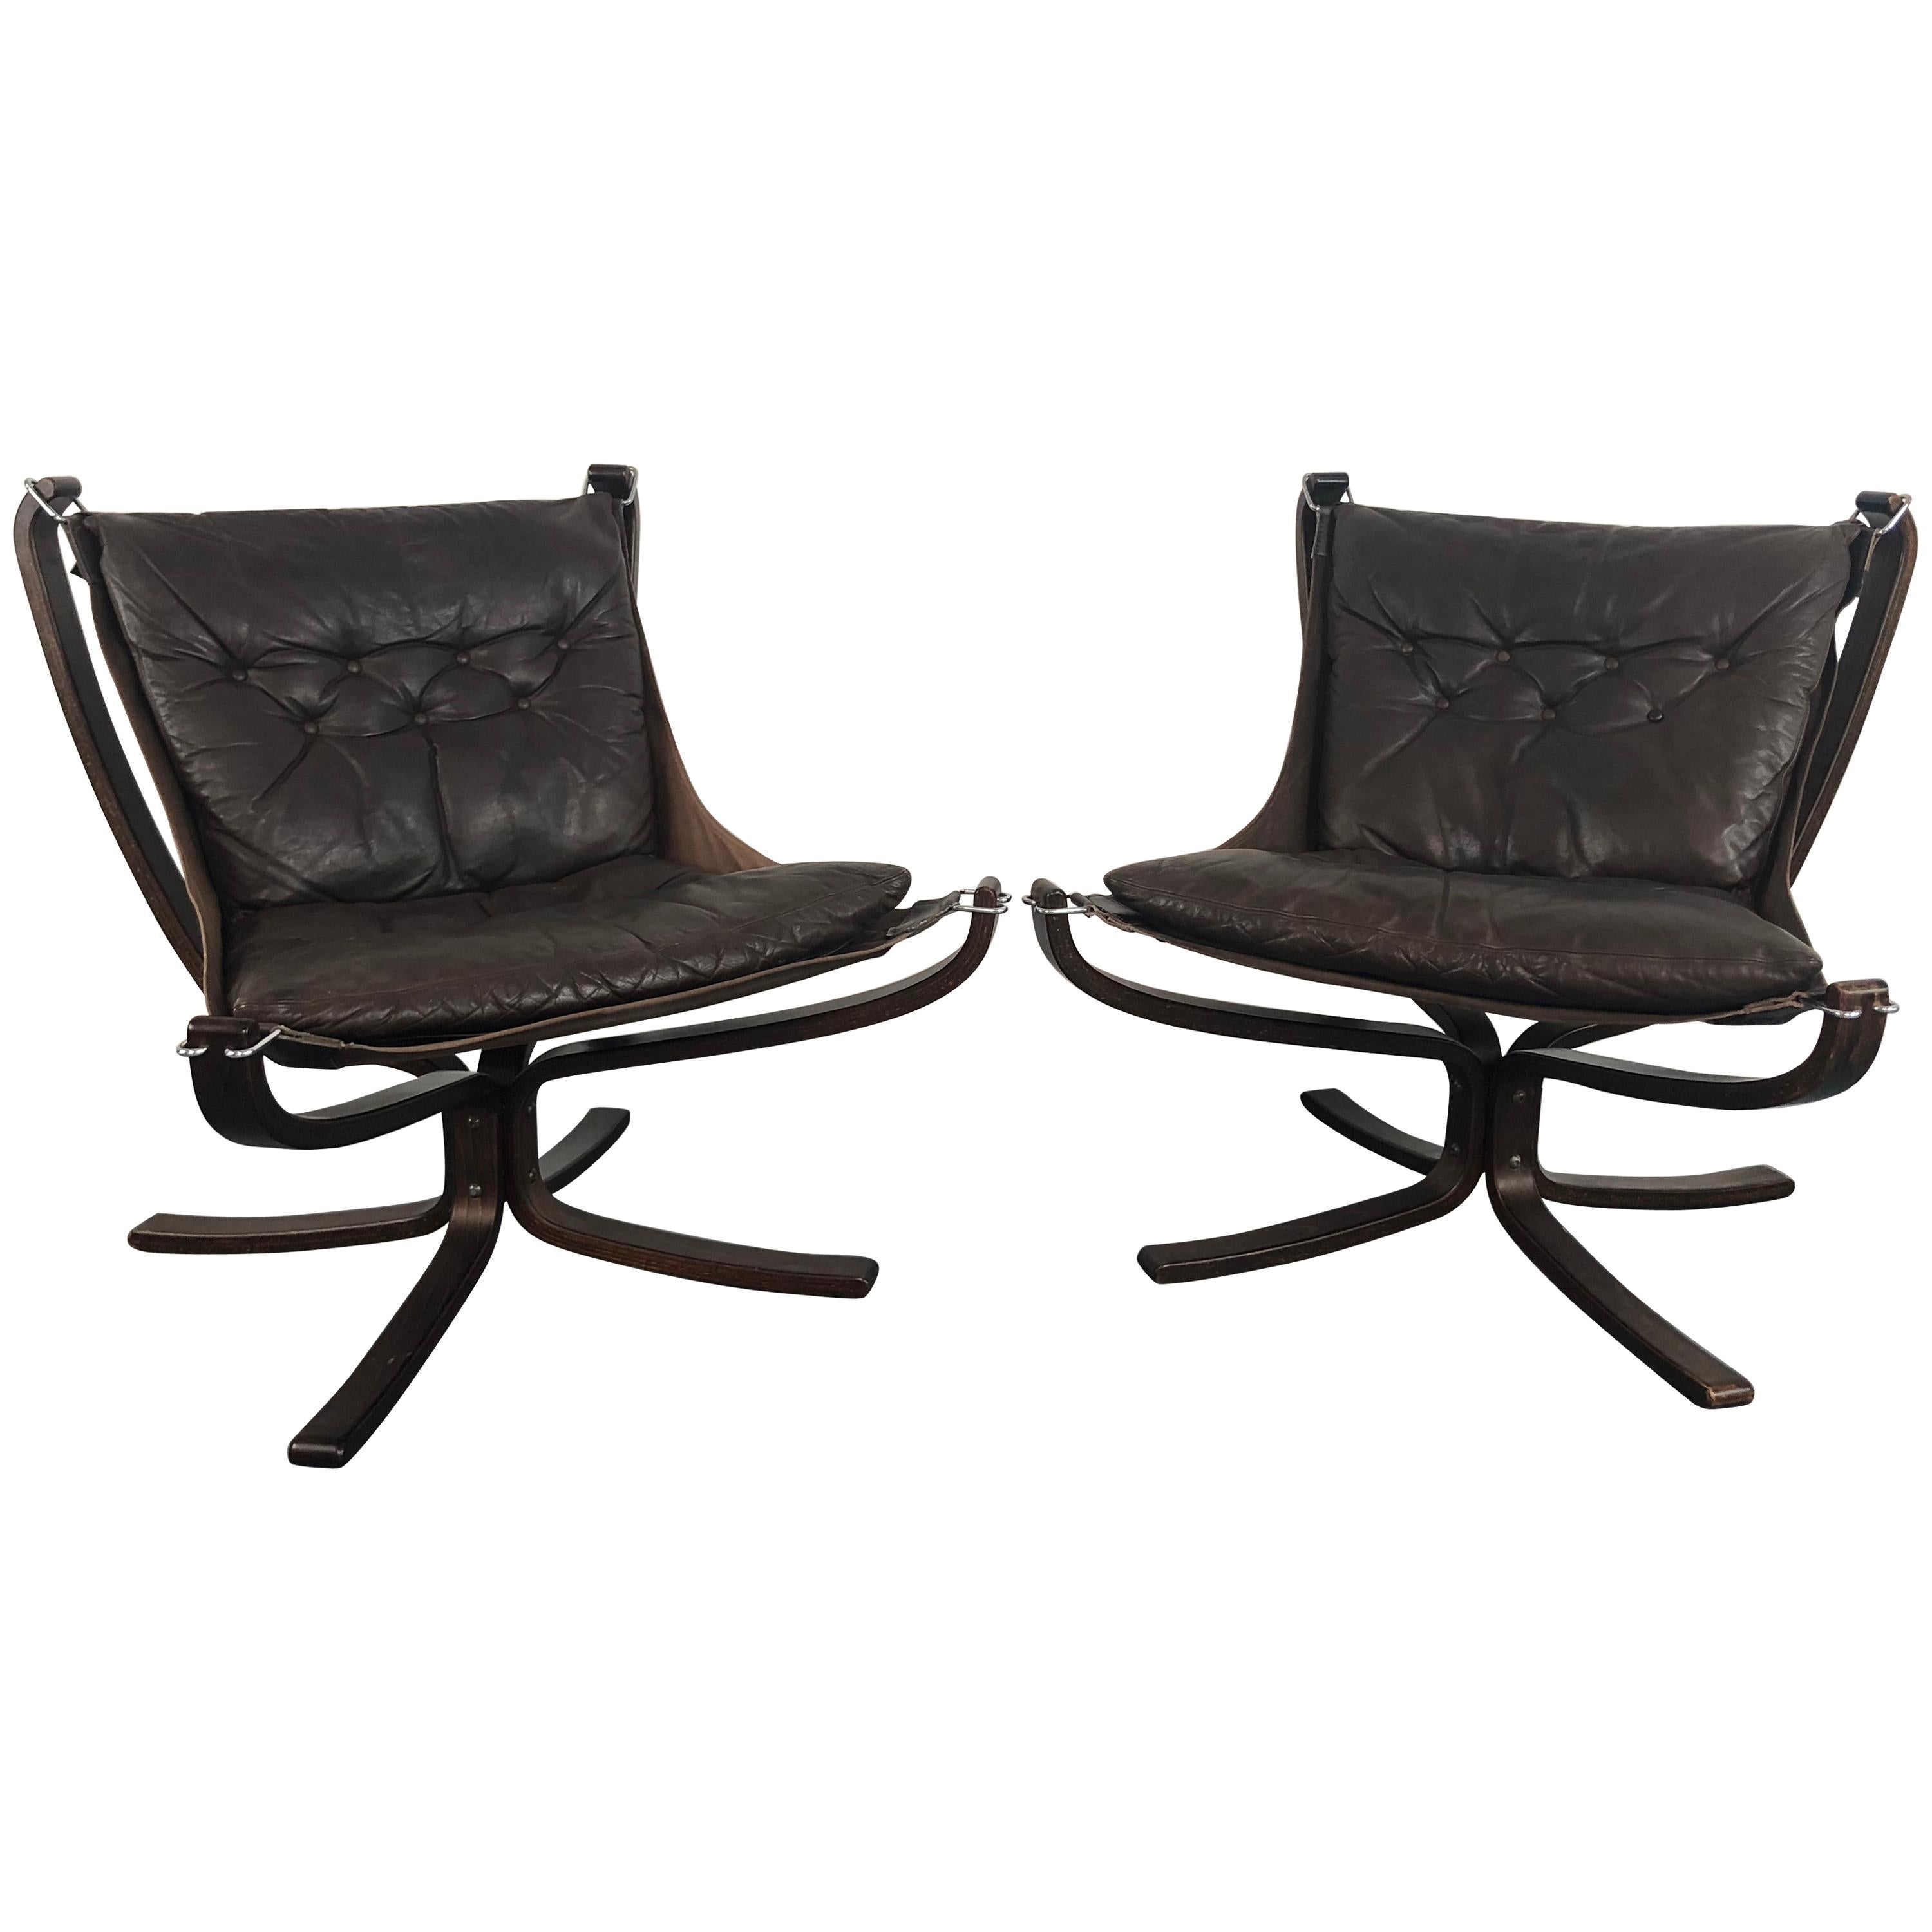 Pair of Vintage Low Back Leather Falcon Chairs Designed by Sigurd Resell For Sale